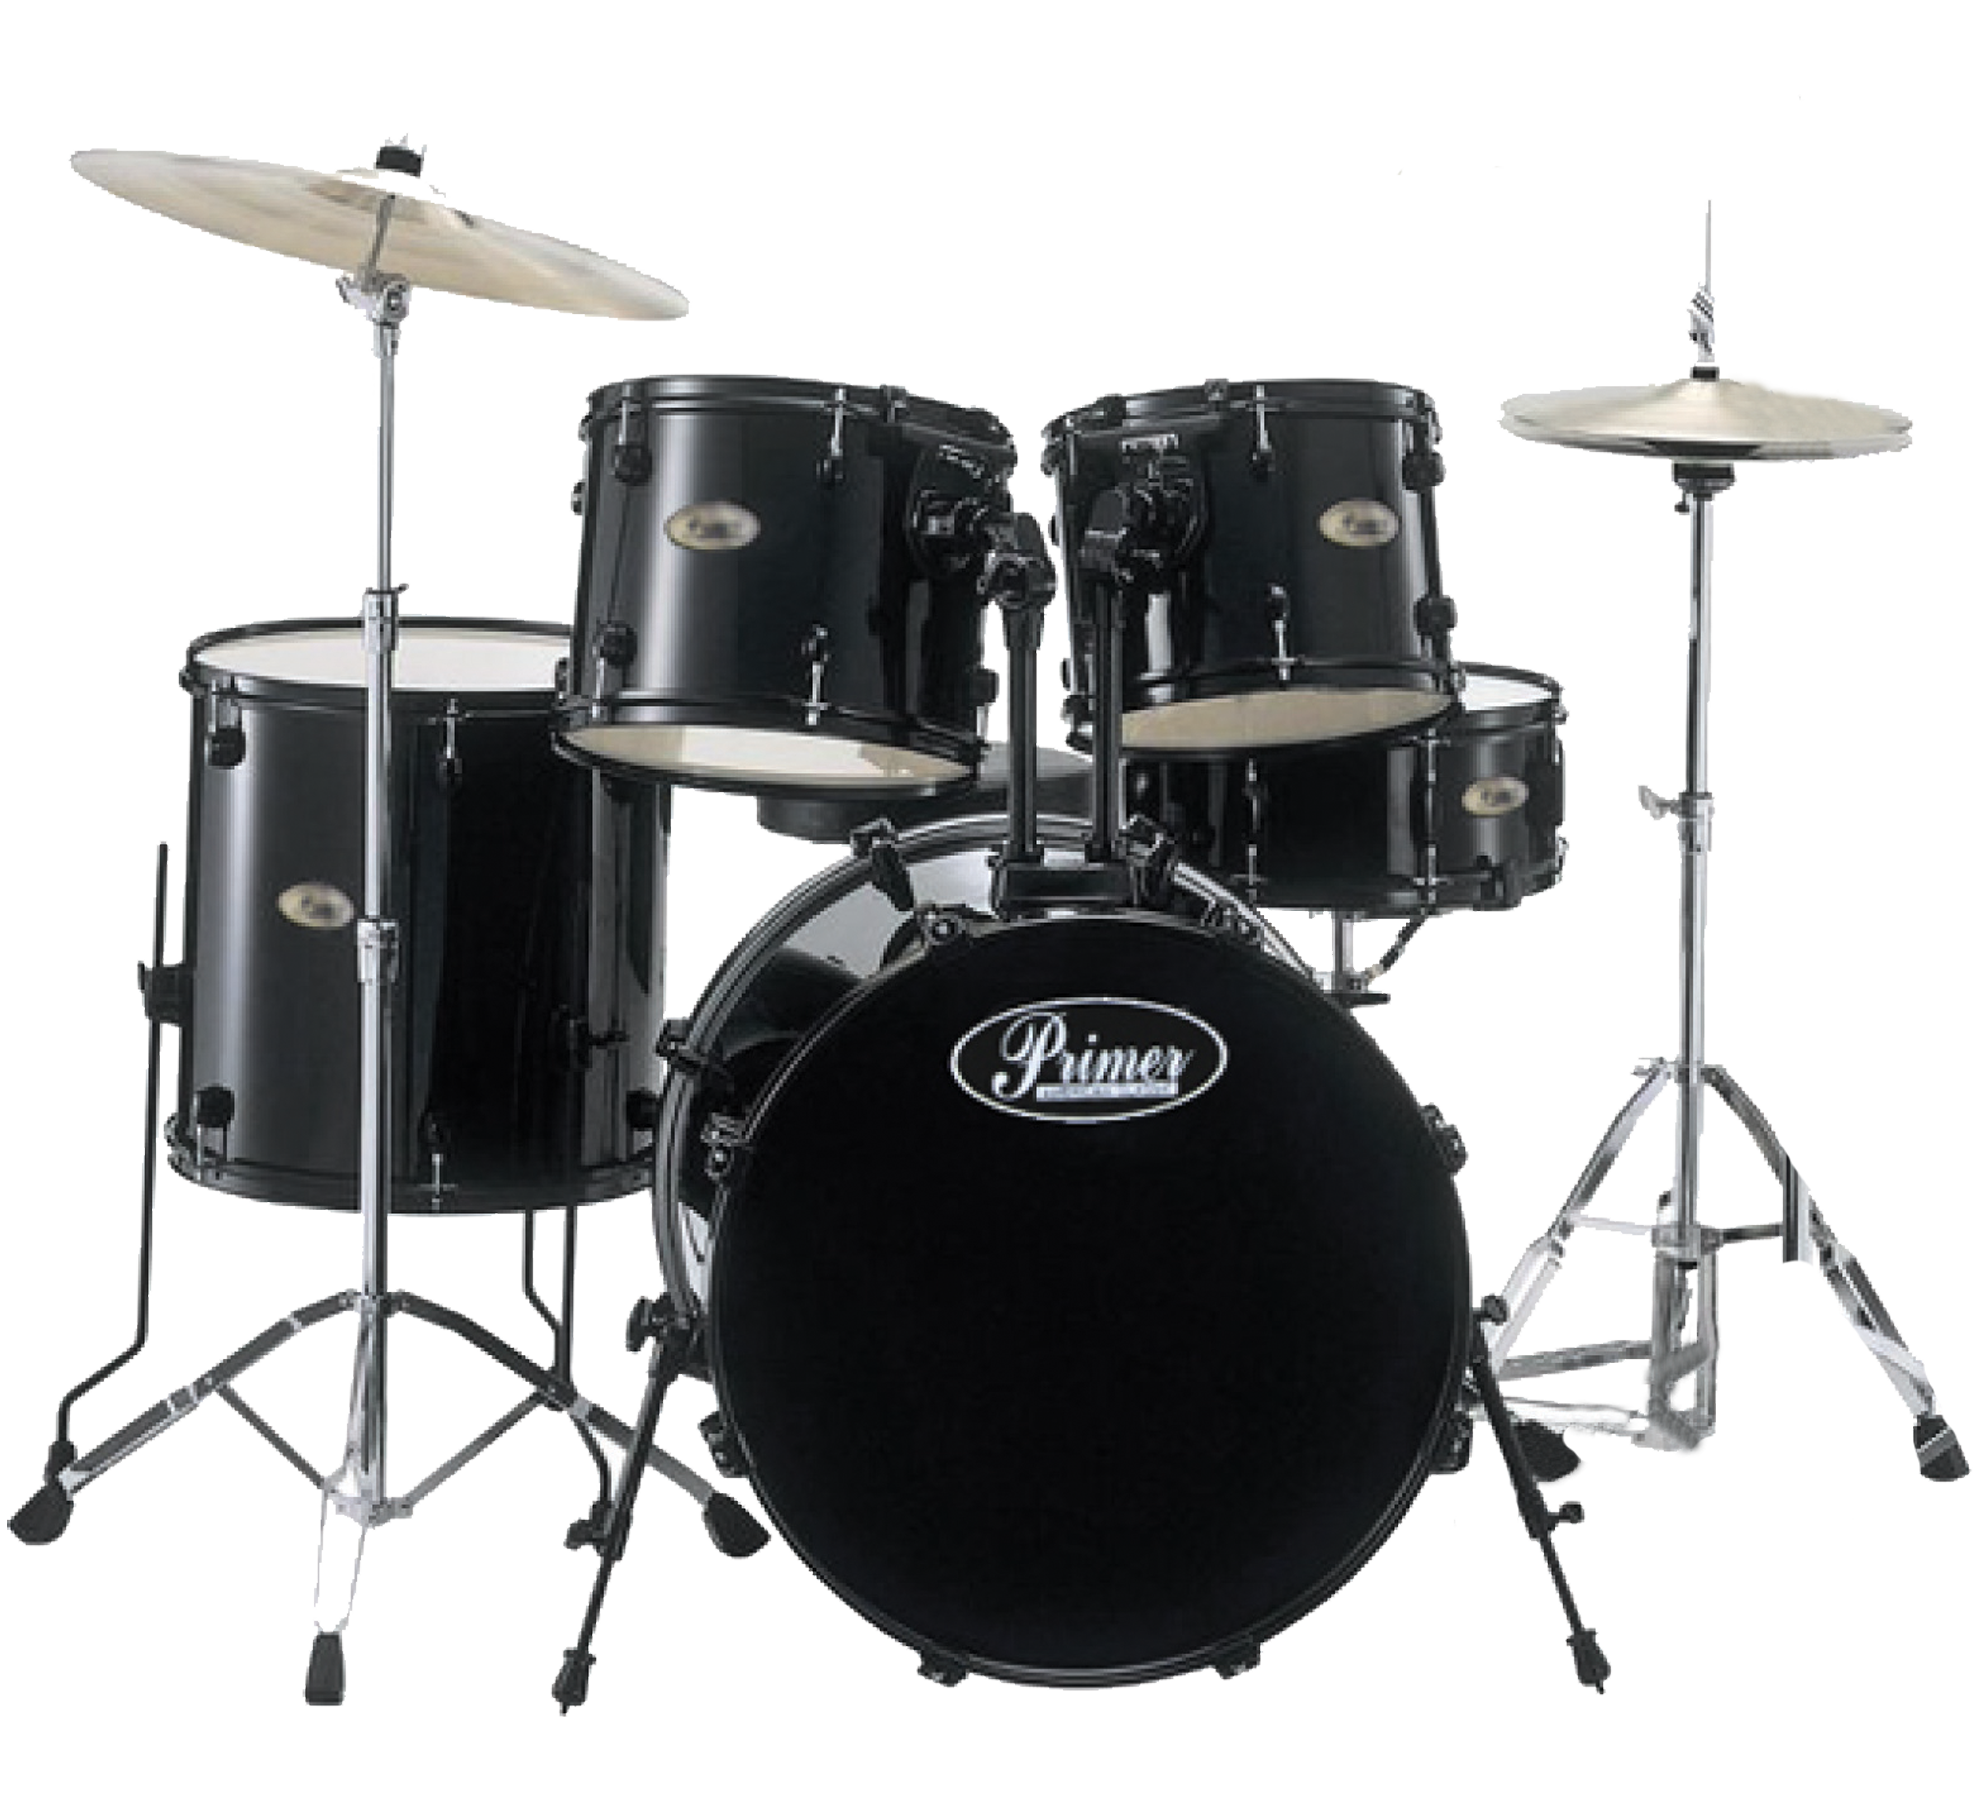 A Drum Set With A Black Background